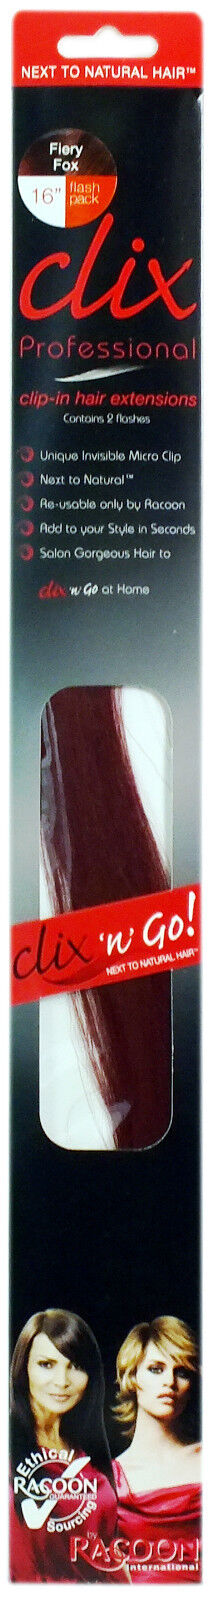 Racoon International Professional Clix N Go Clip in Hair Extensions 16” Length